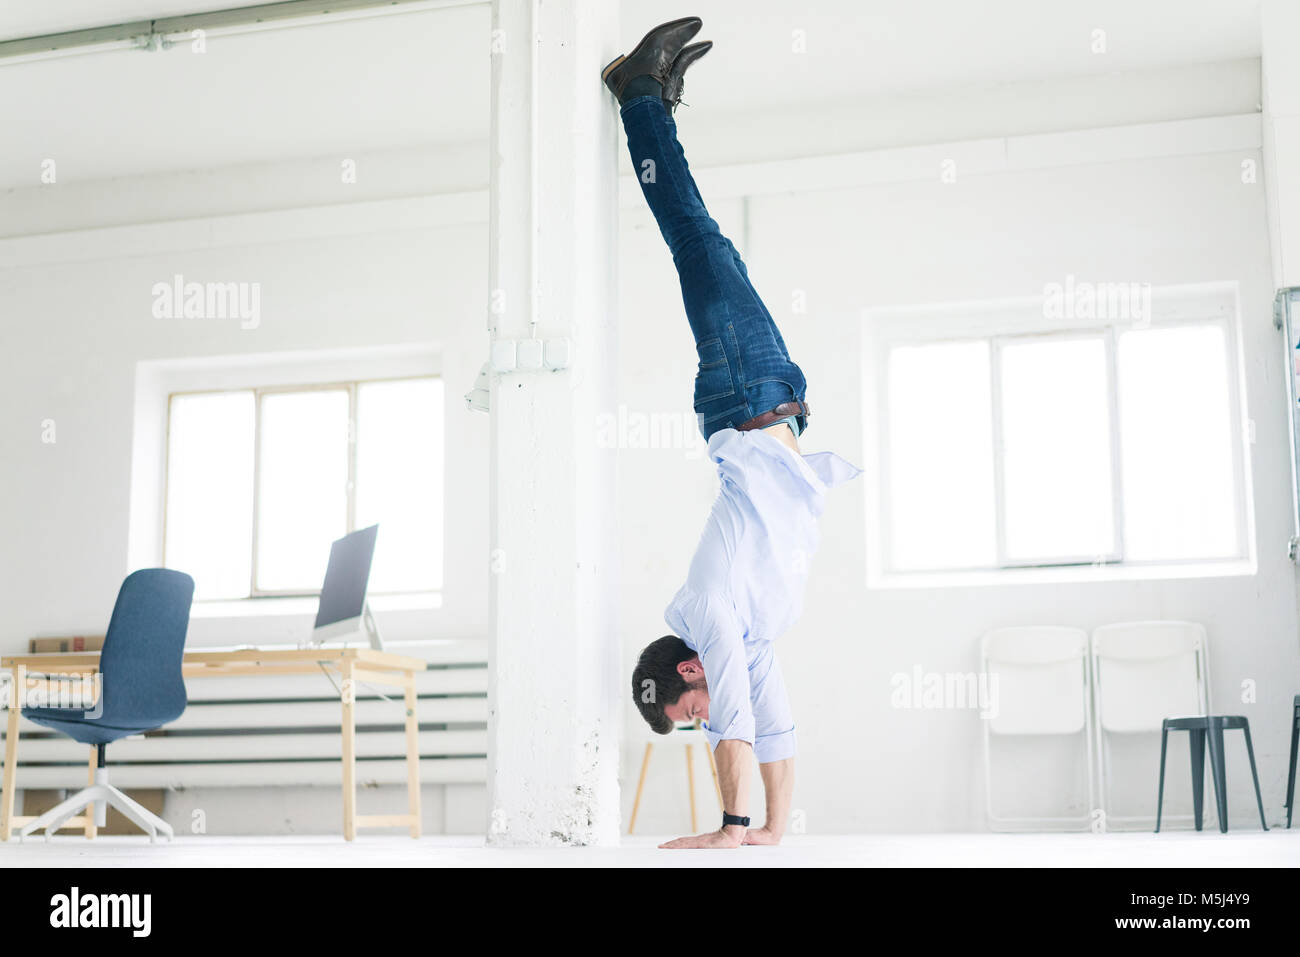 Businessman doing a handstand in office Stock Photo